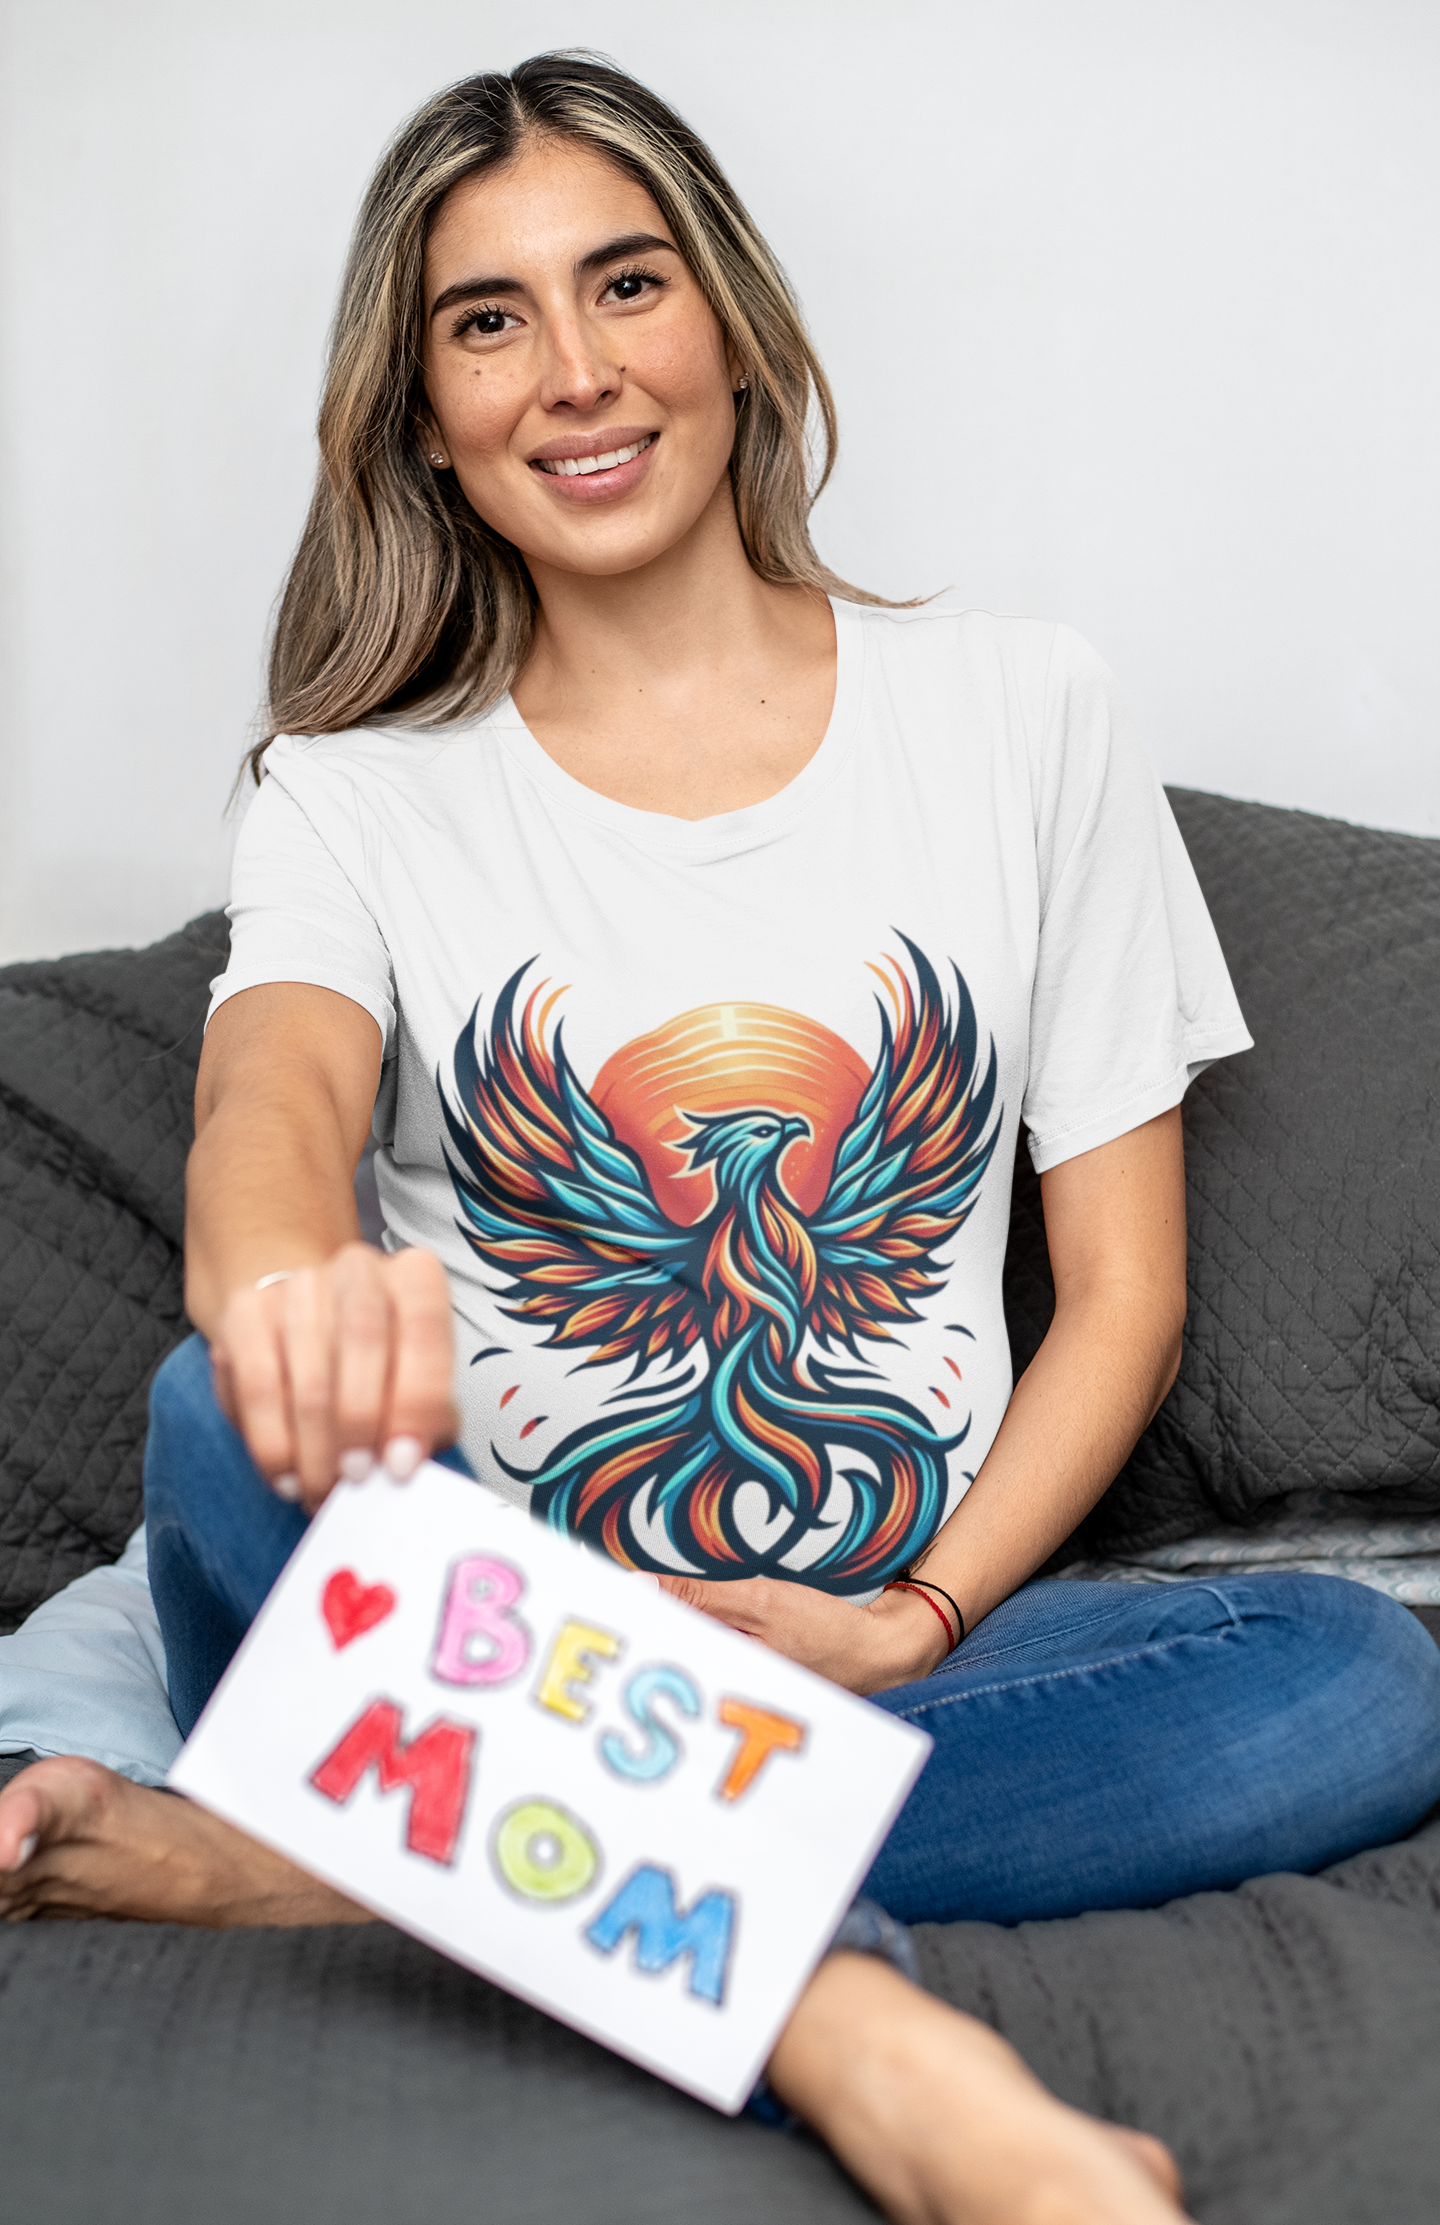 Phoenix Rising Again - T-Shirt - Resilience | Are you celebrating a rebirth? The Phoenix is the symbol of overcoming obstacles and change in life.